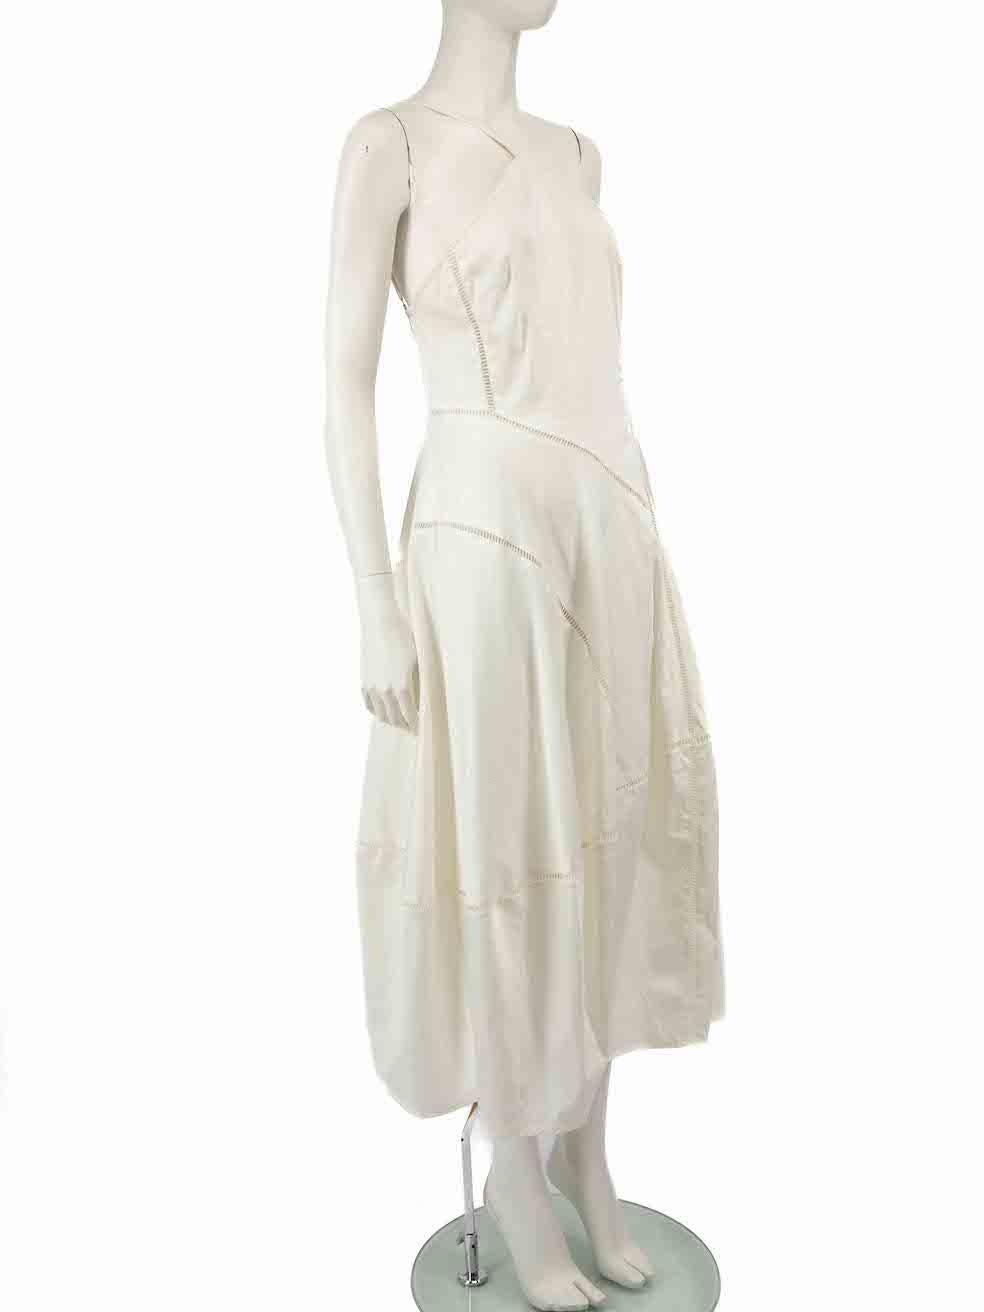 CONDITION is Good. General wear to dress is evident. Moderate signs of wear to the front and neck-edge with discoloured marks on this used Cult Gaia designer resale item.
 
 
 
 Details
 
 
 White
 
 Cotton
 
 Dress
 
 Midi
 
 Asymmetric top- one